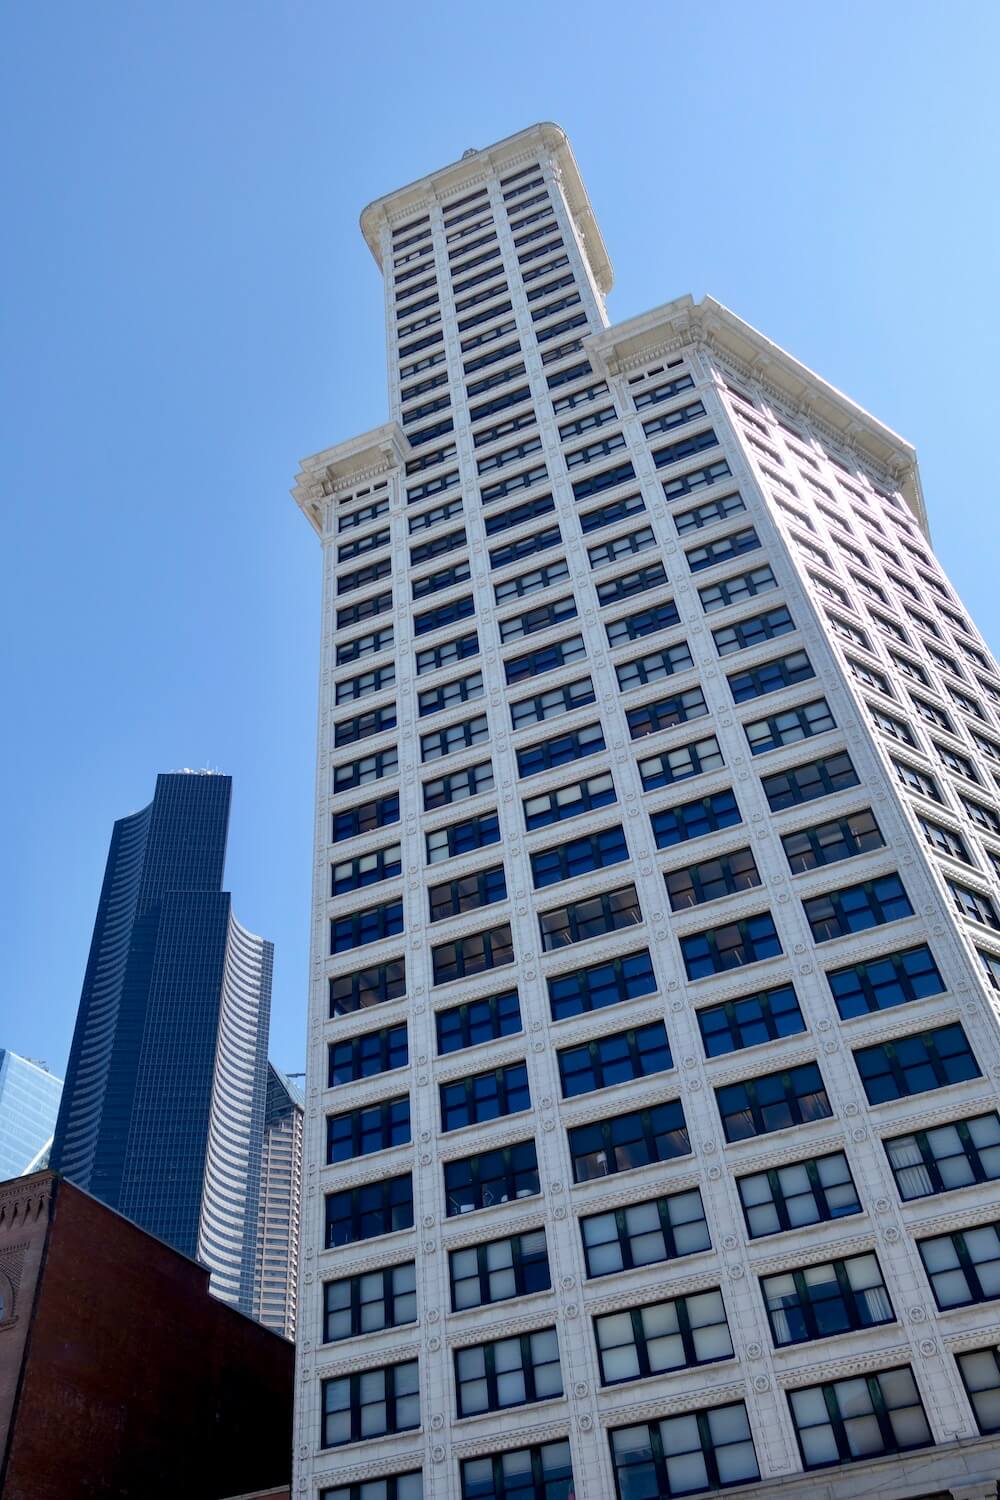 Smith Tower in Seattle rises up around other larger buildings, but this angle makes it seem like the early 1900's structure is the biggest.  